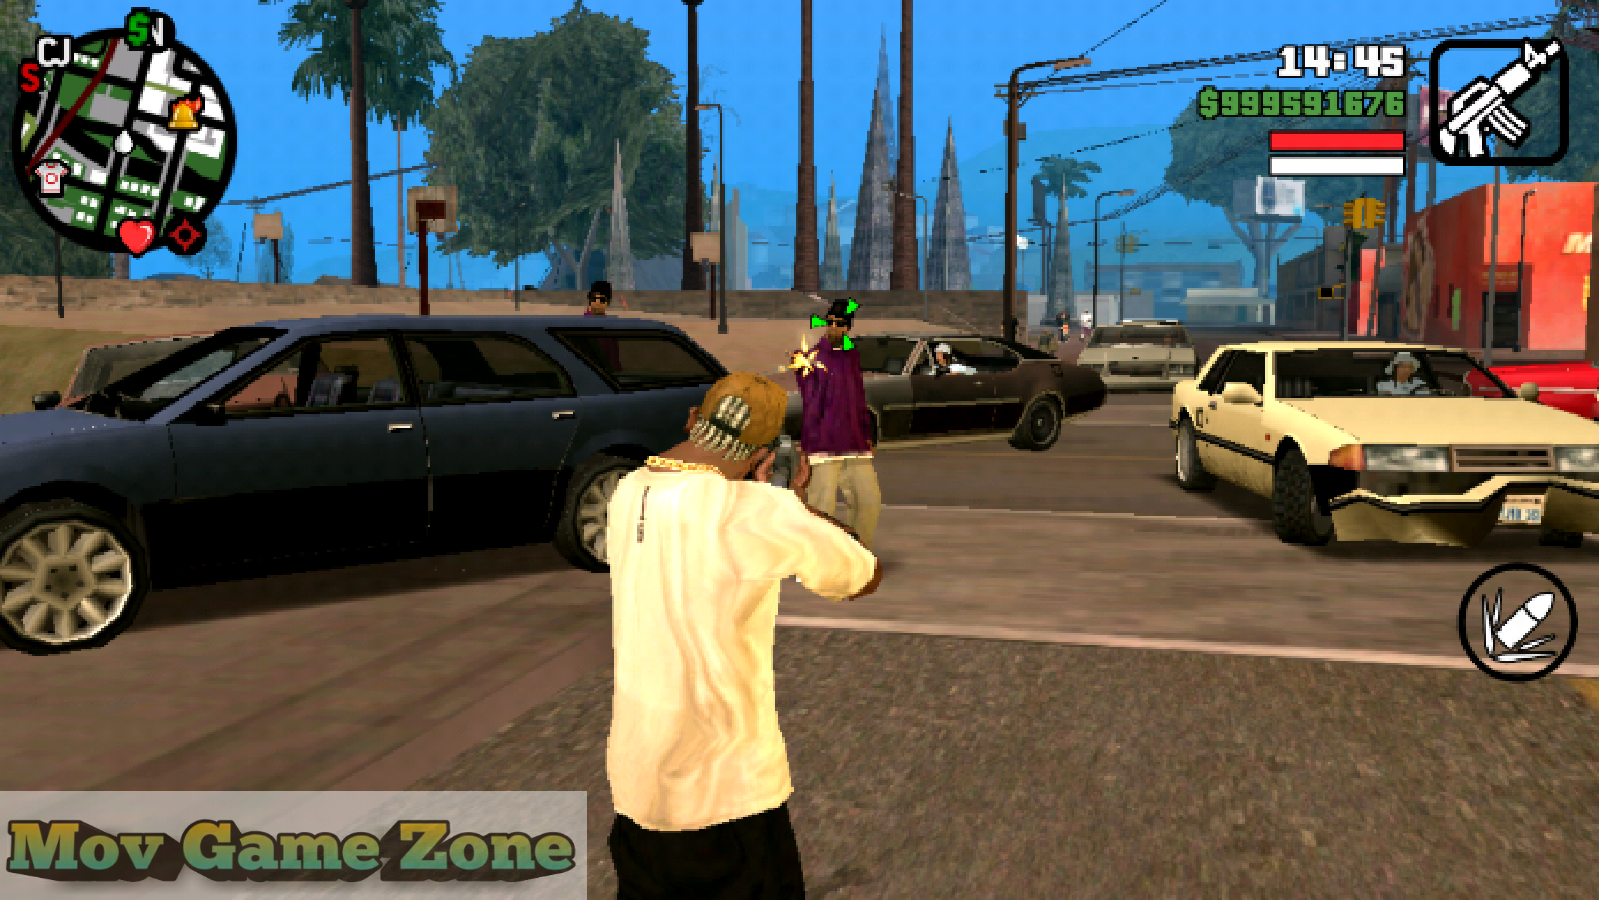 Gta san andreas game file download for ppsspp